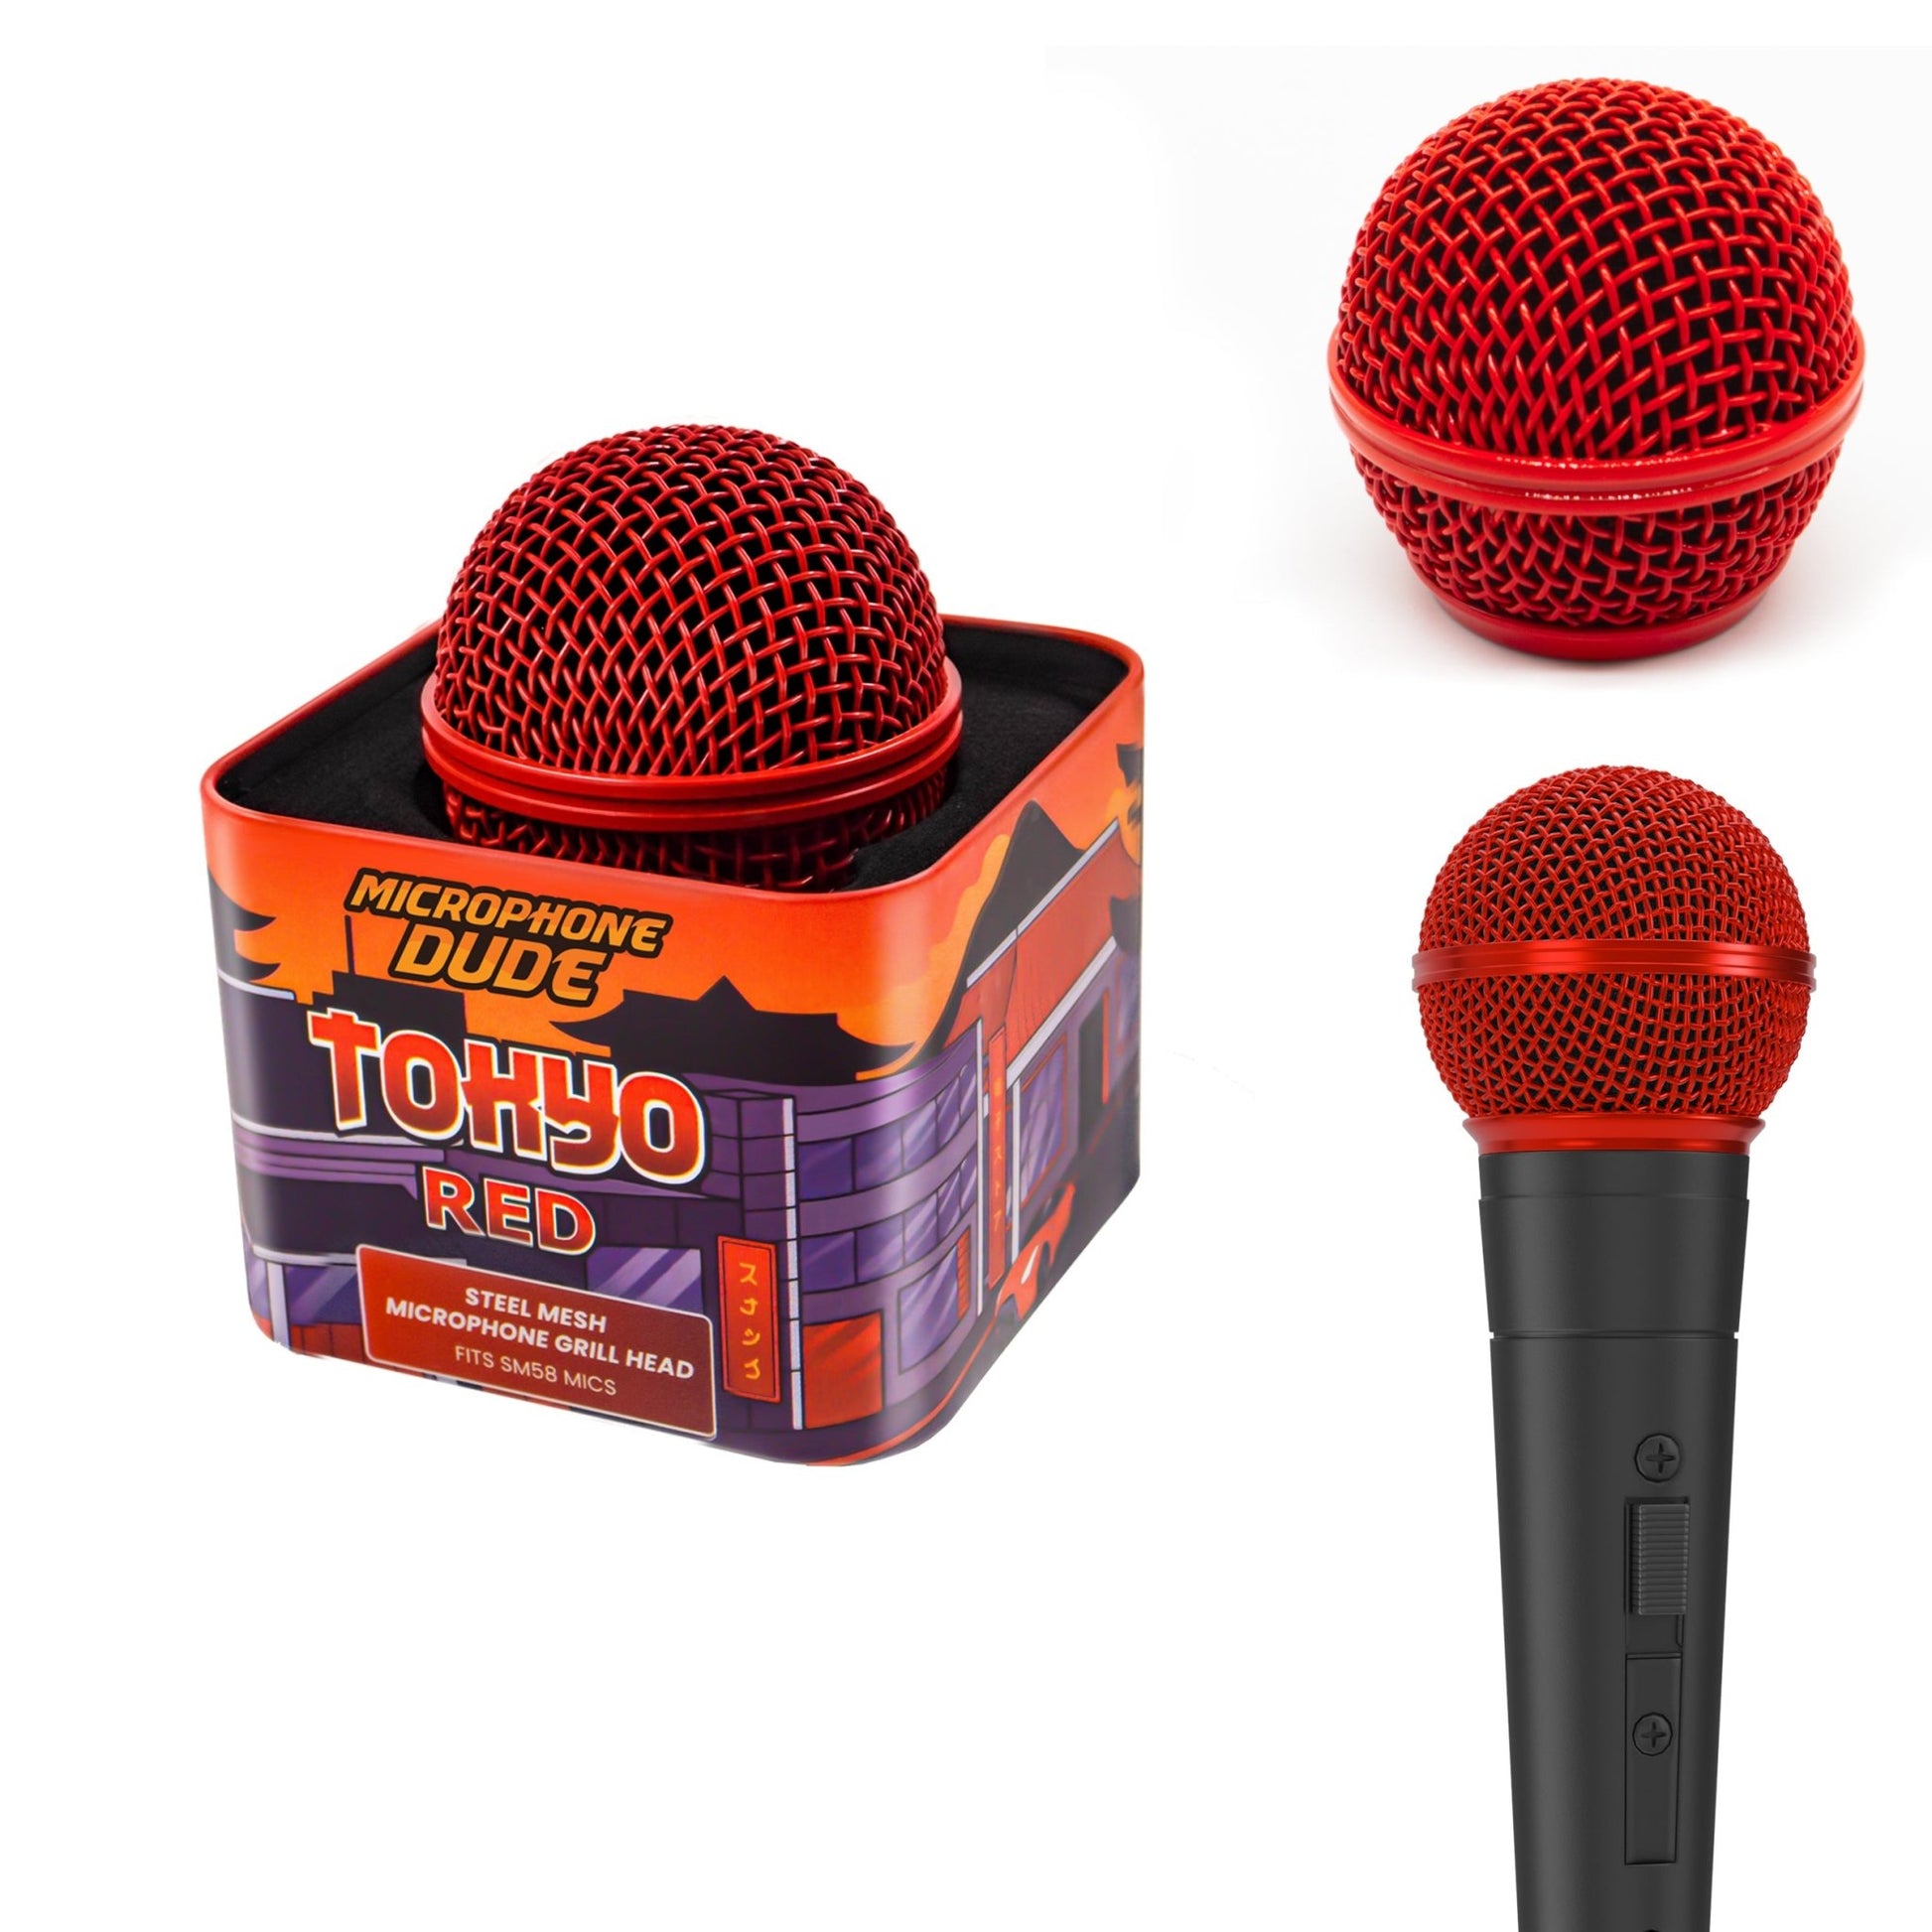 Tokyo Red - SM58 Replacement Microphone Grille - Microphone Dude